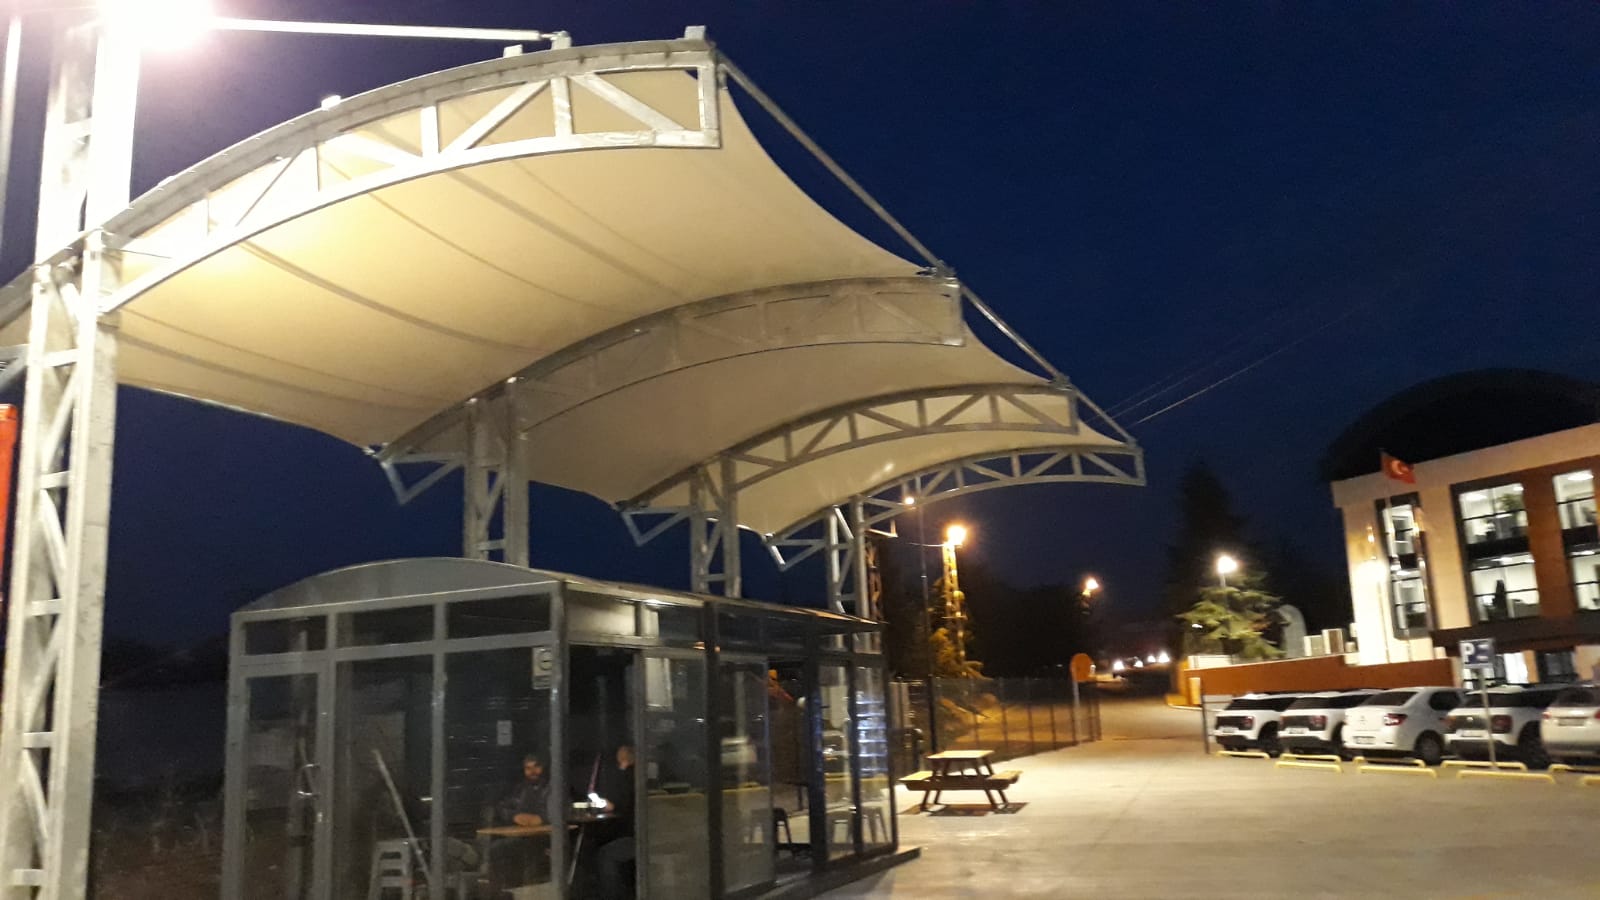 LİBYA ENTRANCE CANOPY TENSILE STRUCTURE